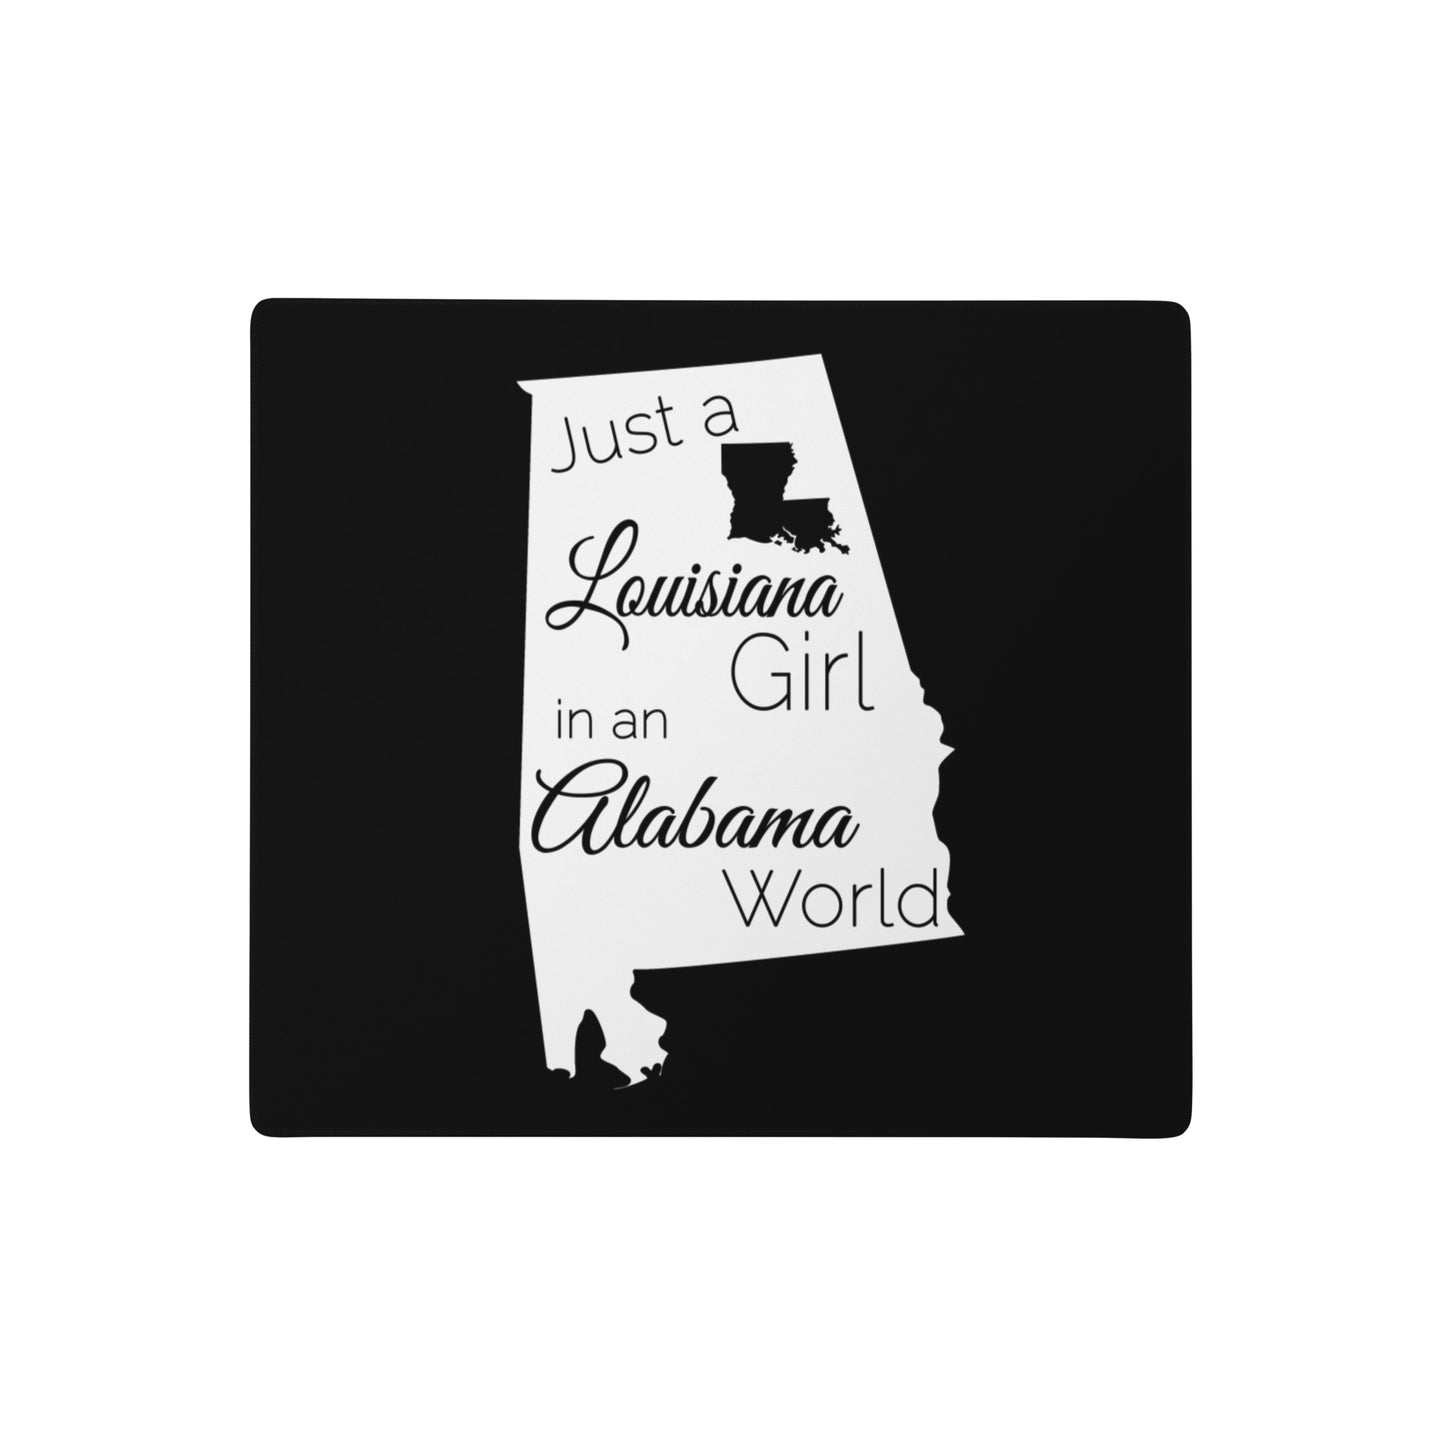 Just a Louisiana Girl in an Alabama World Gaming mouse pad